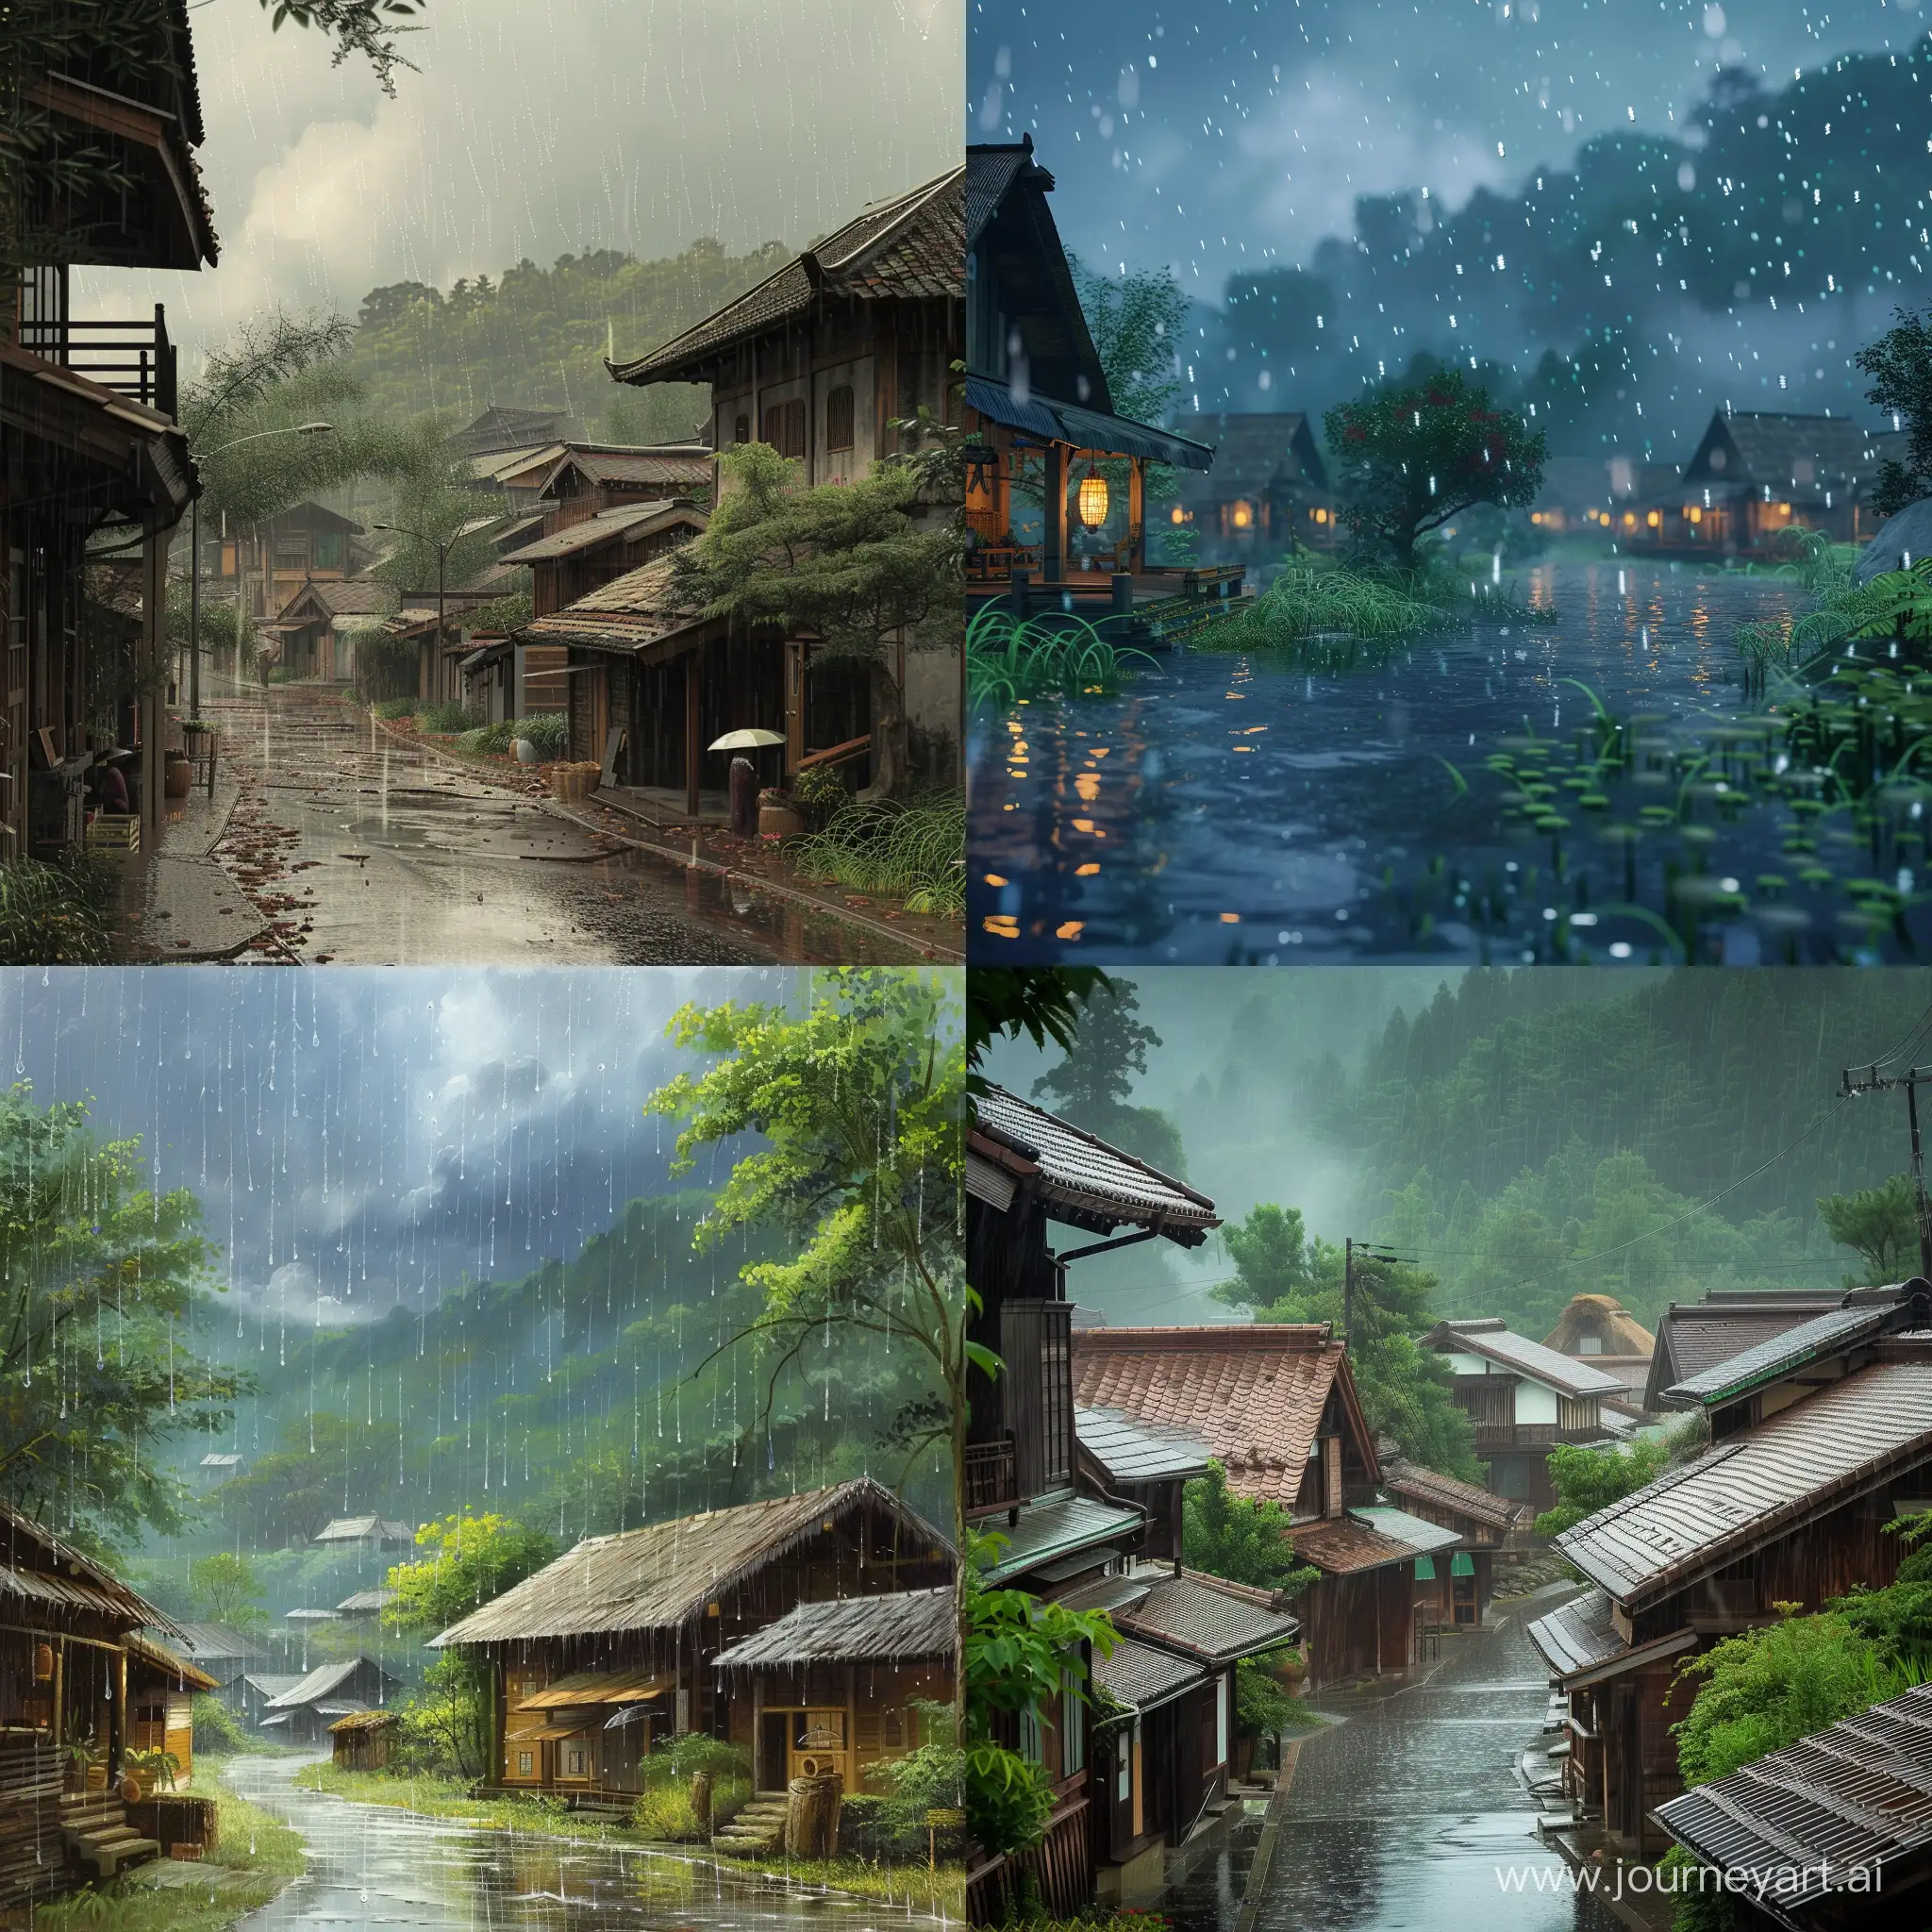 Rainy-Day-in-a-Village